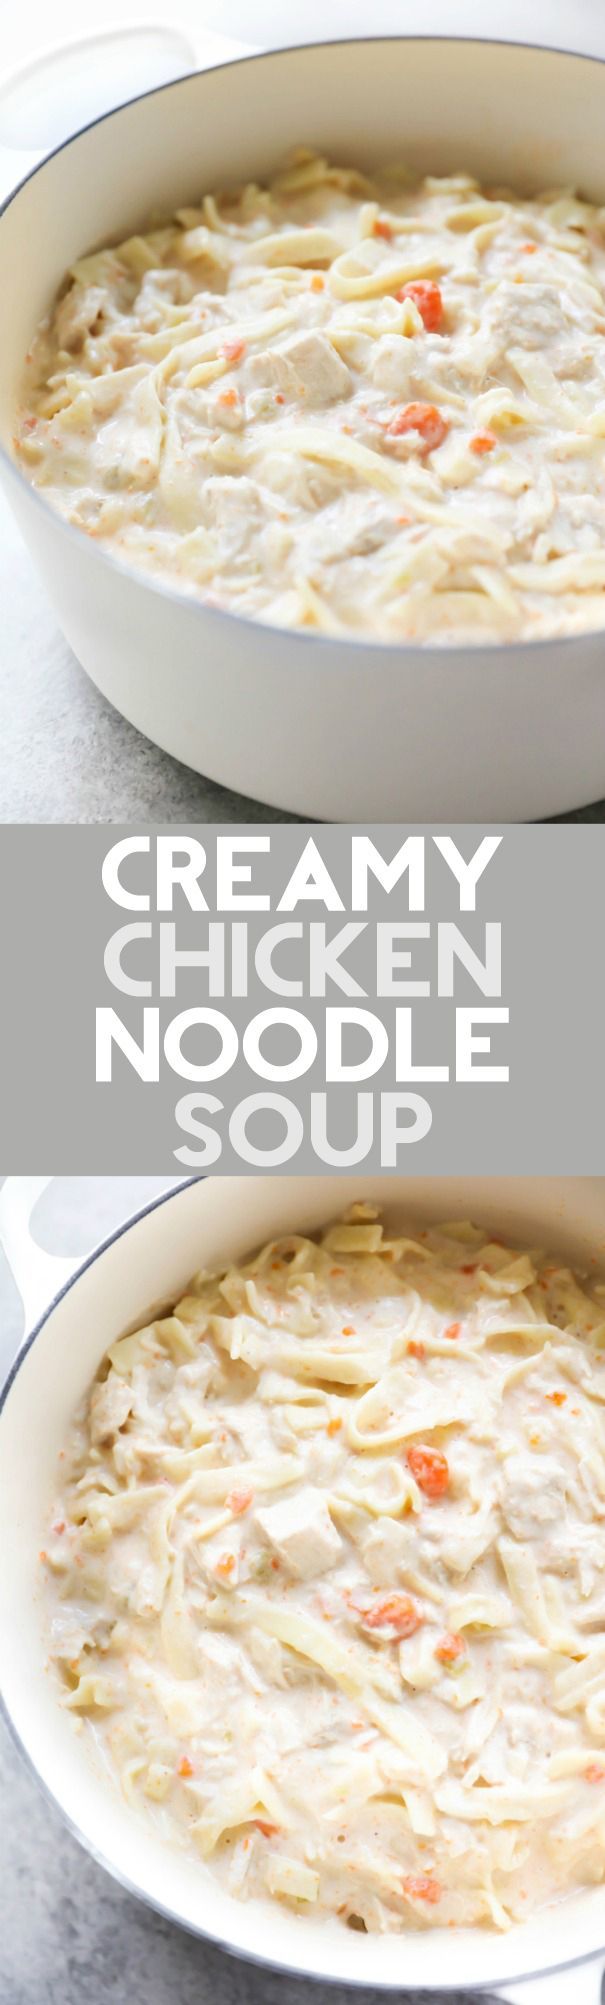 This Creamy Chicken Noodle Soup is one of my family’s favorites! The flavor is perfection and the creaminess really knocks it out